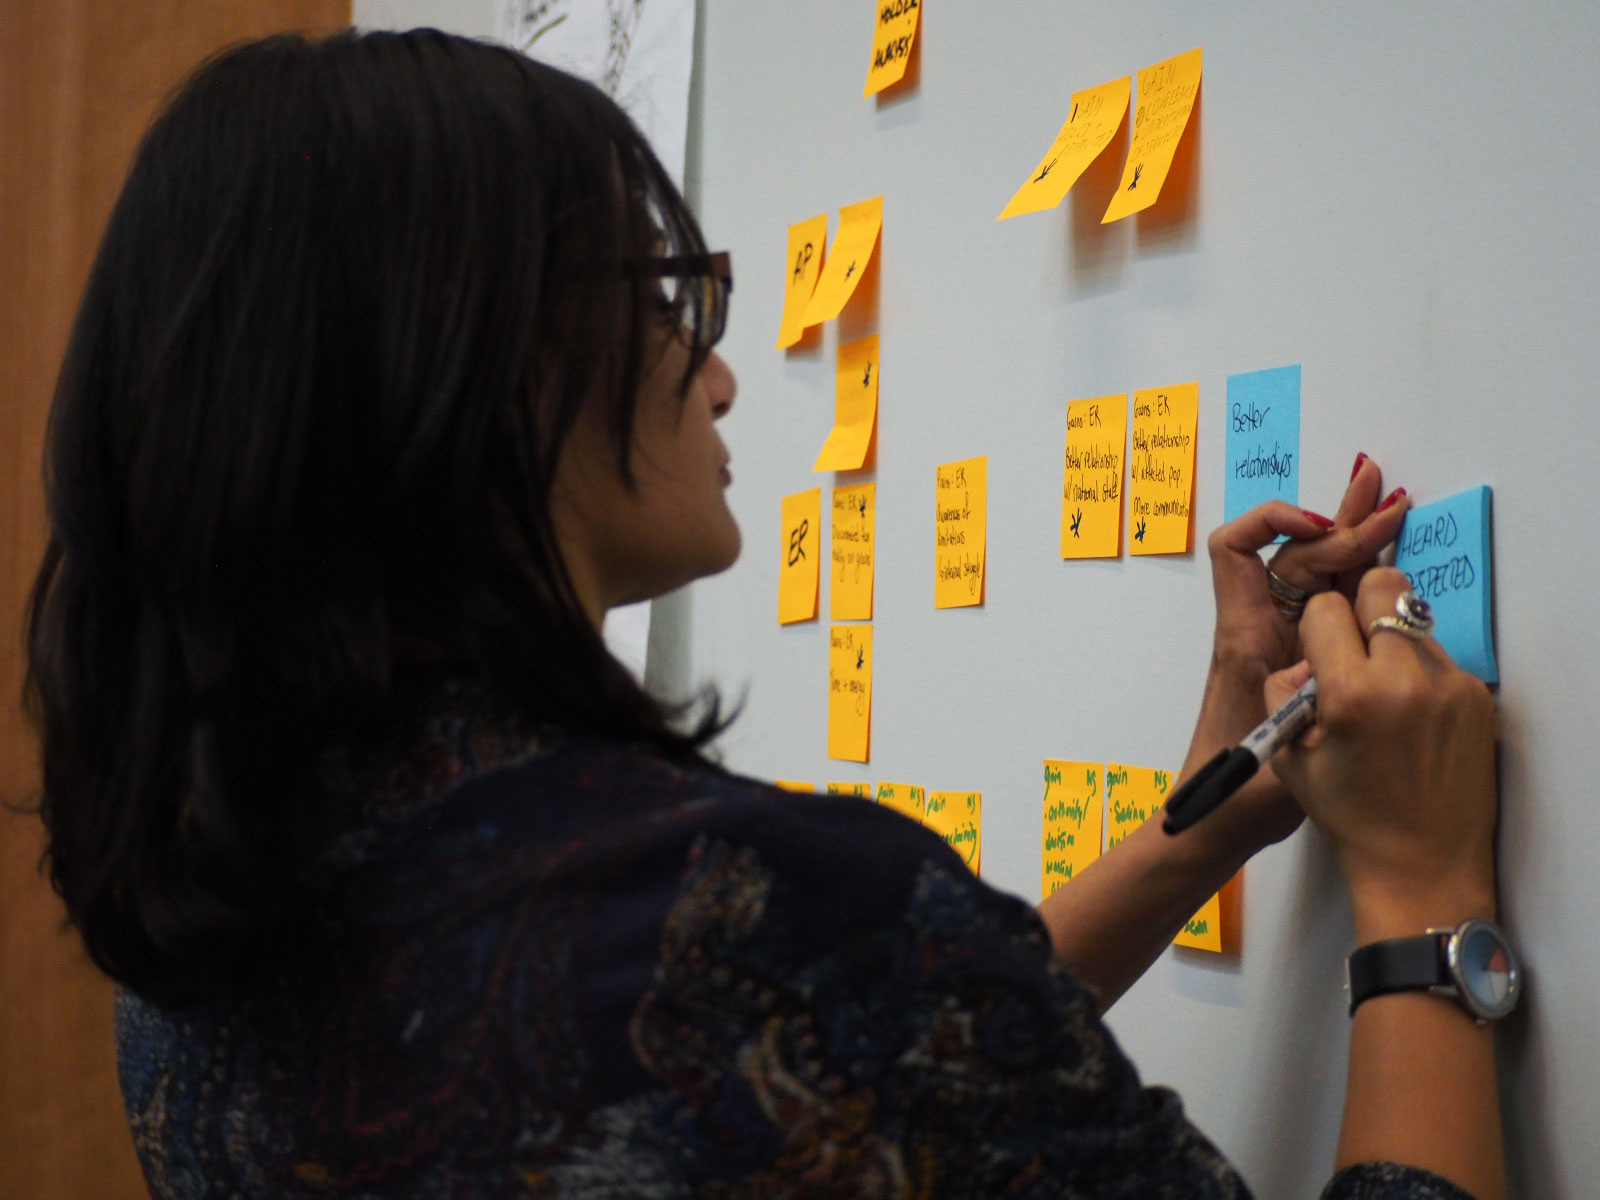 Emergency Data Science participant writes on a sticky note